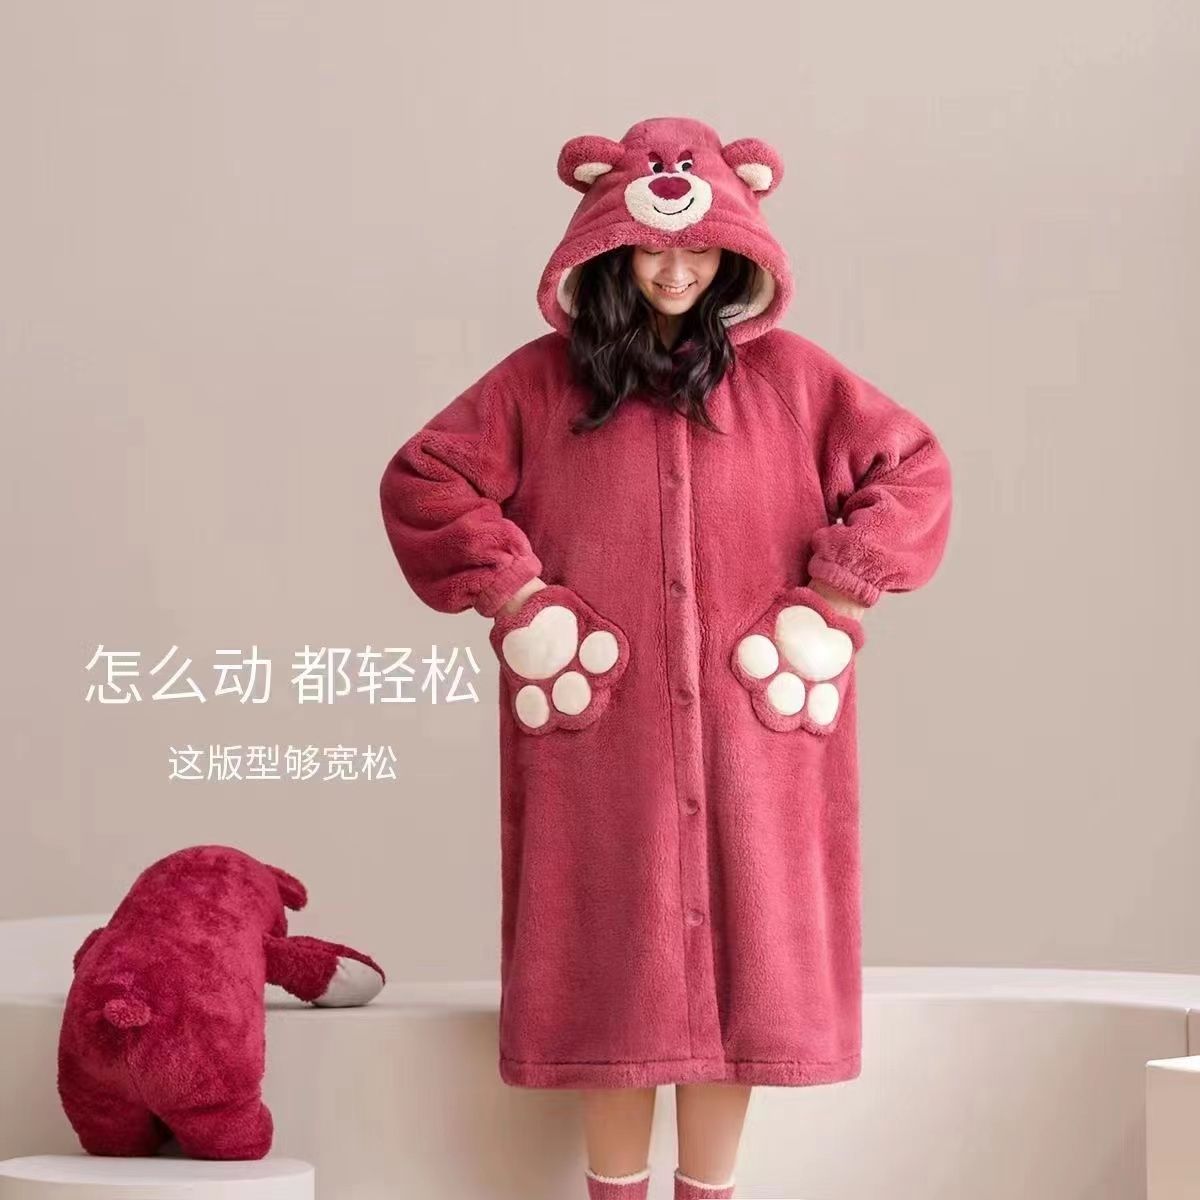 Cute pajamas women's autumn and winter student nightgown girls bathrobe autumn and winter pajamas women loose plus velvet lengthened can be worn outside